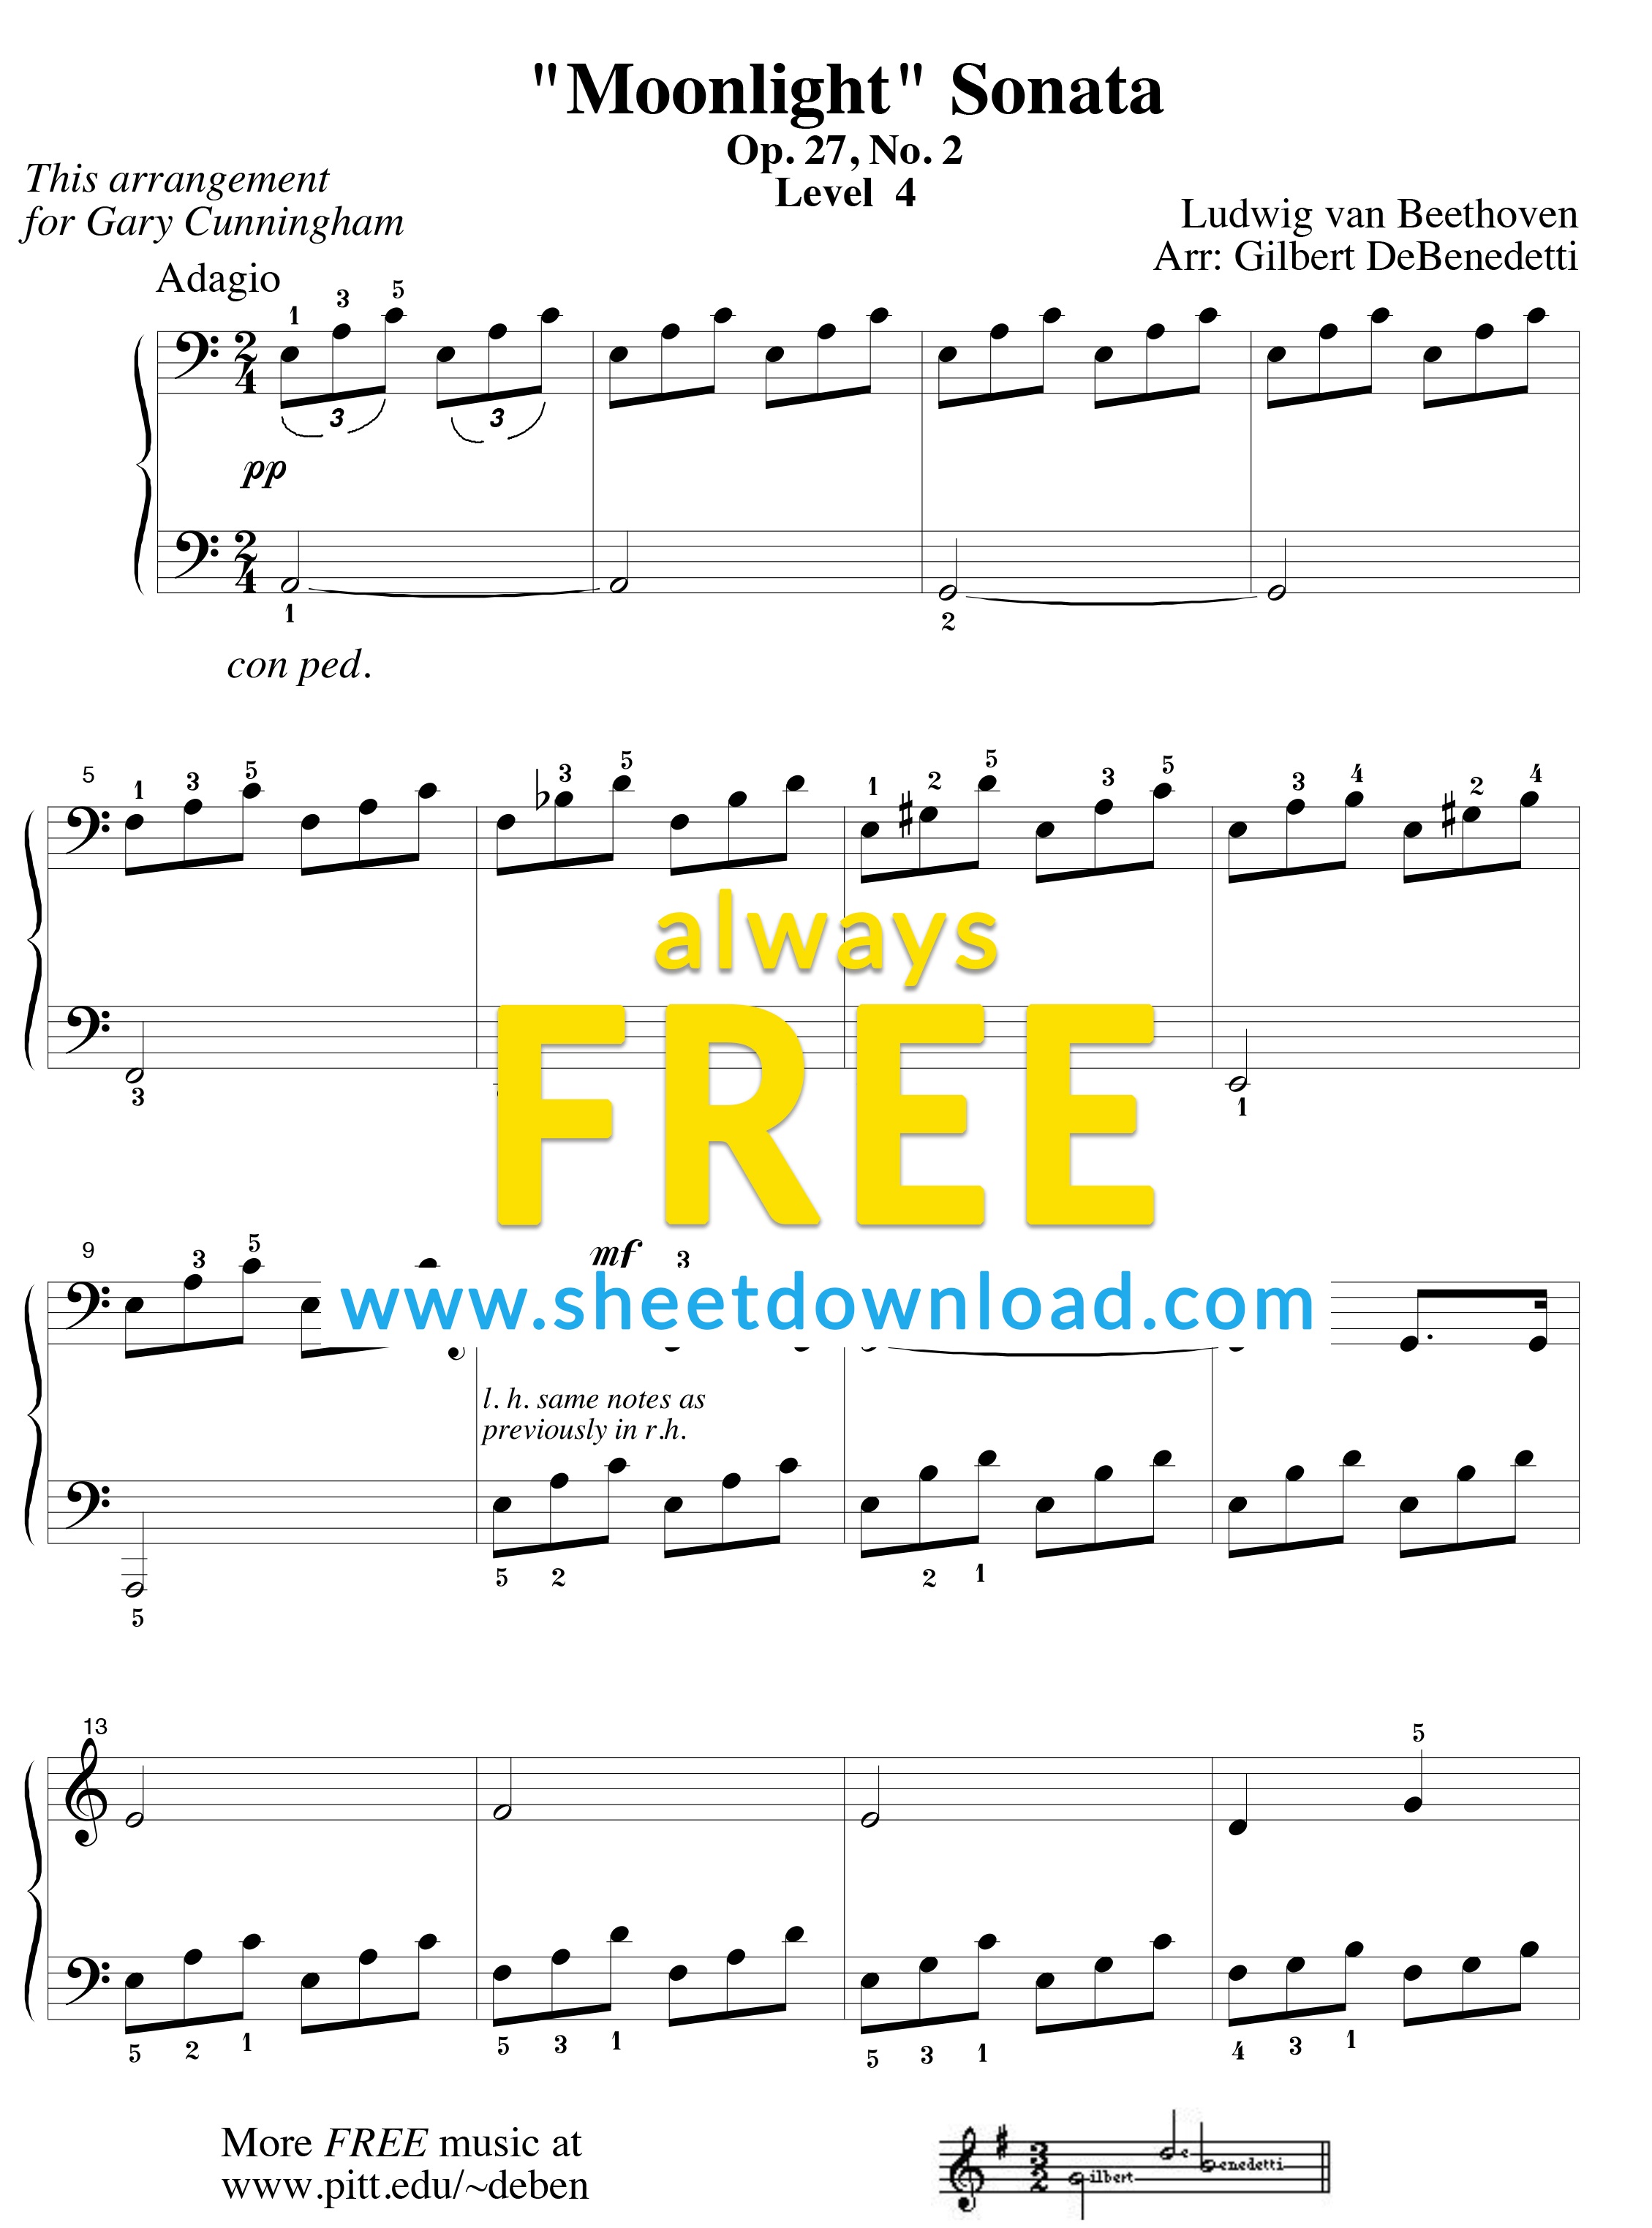 Free Piano Sheet Music To Download And Print - High Quality Pdfs - Free Printable Music Sheets Pdf